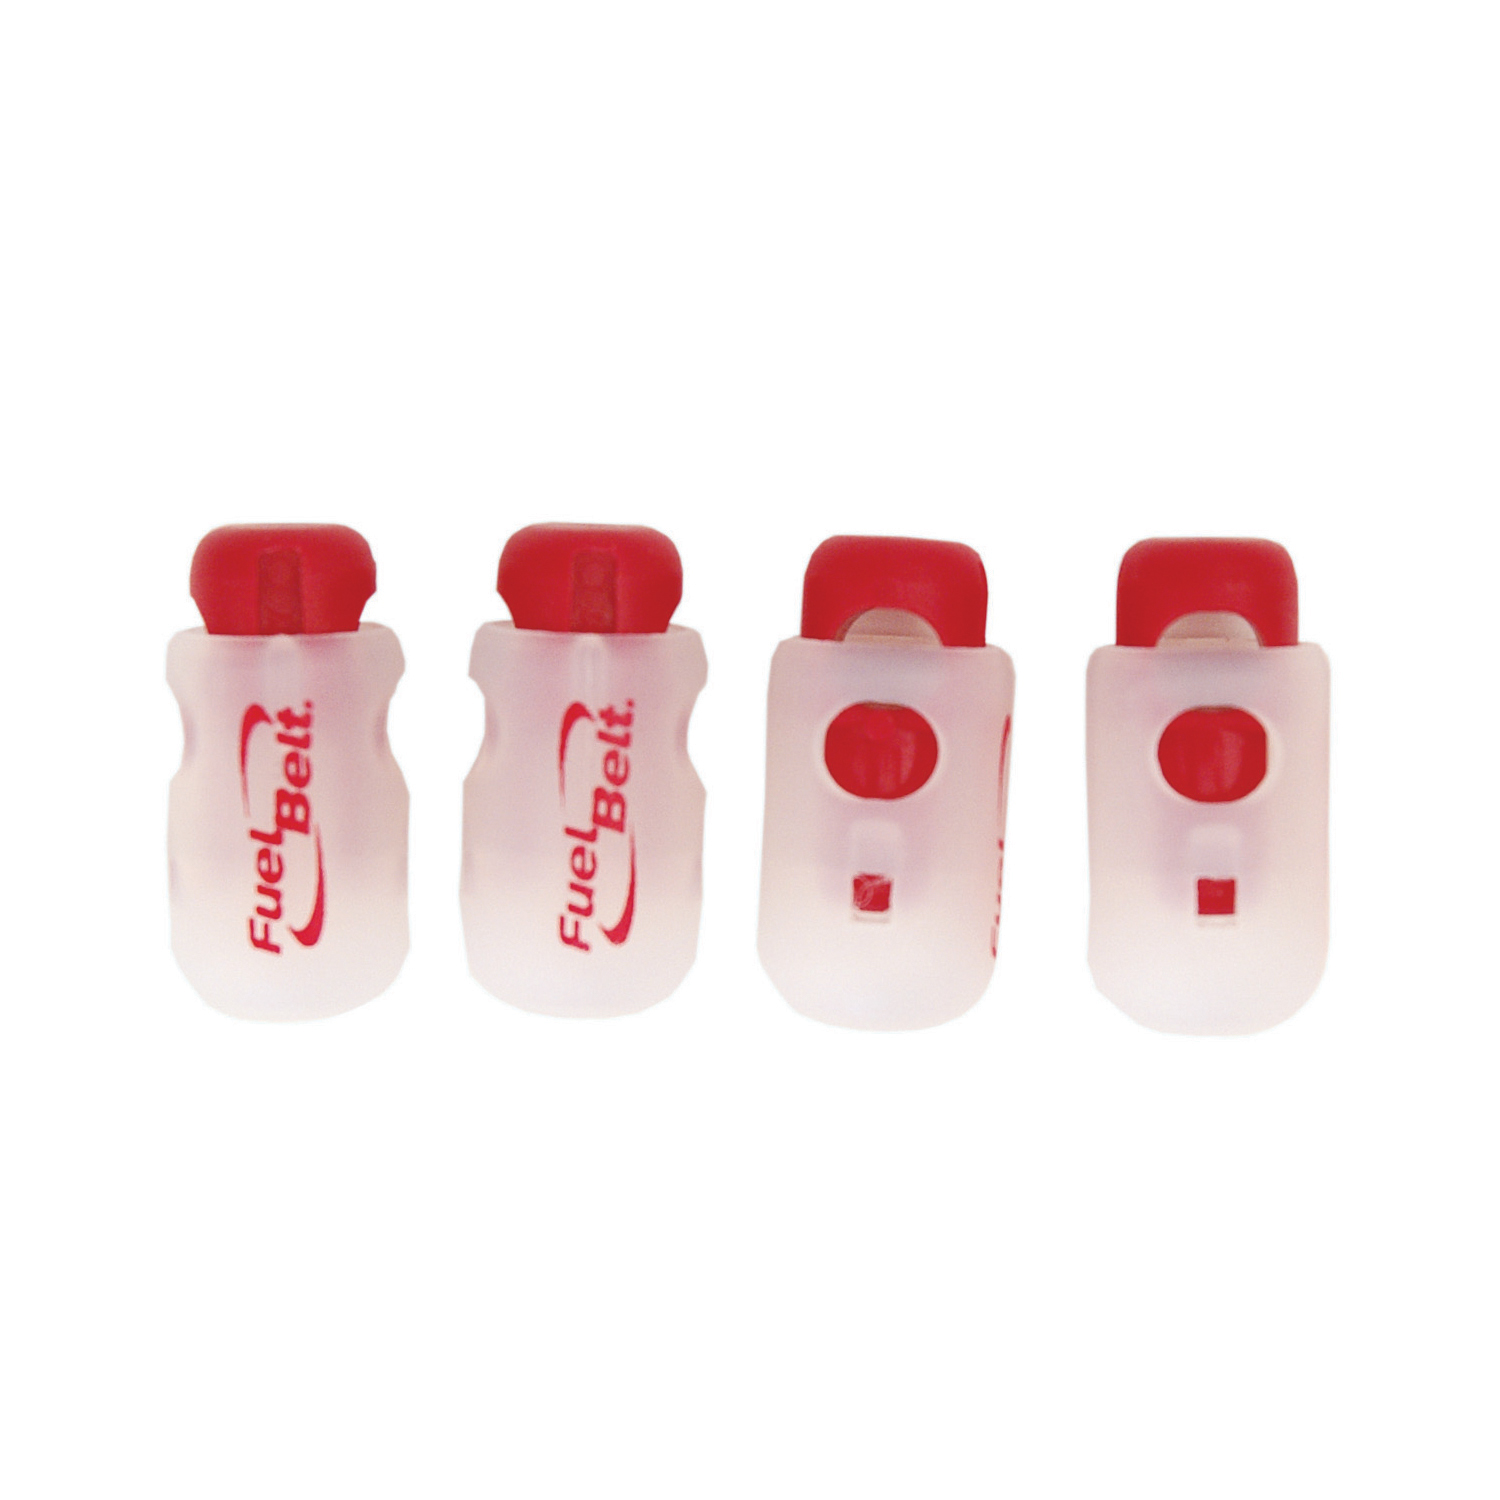 Lace Locks-4 pack White/Red OS